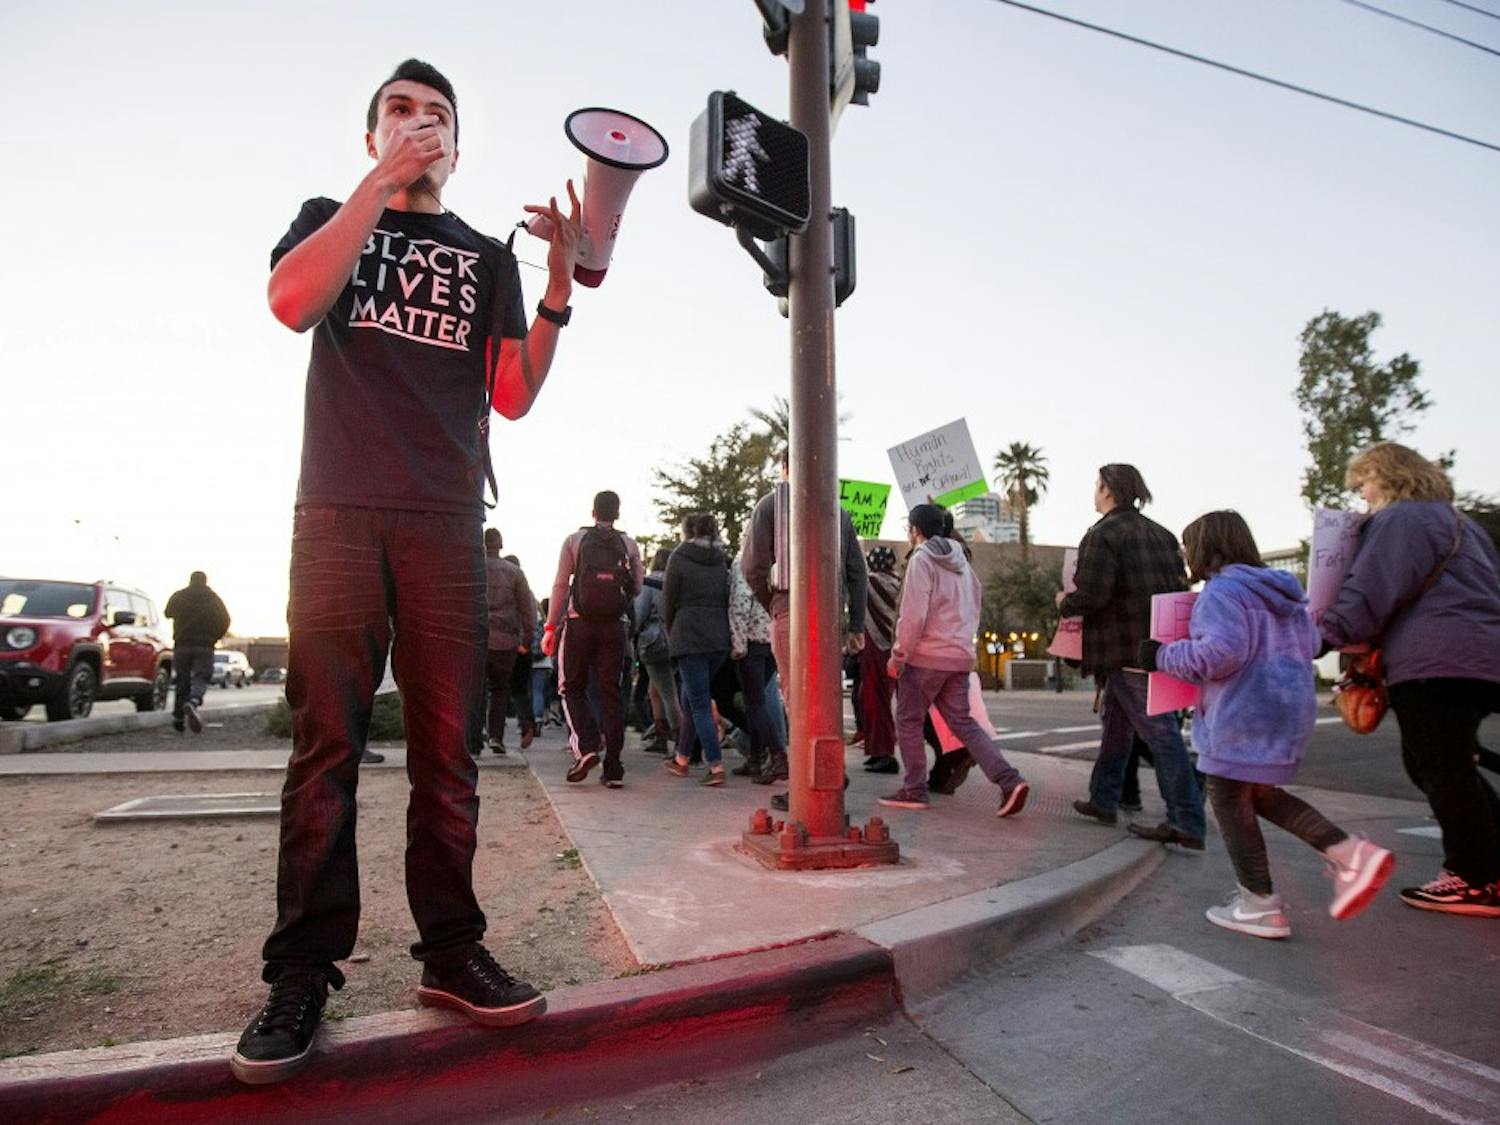 Randy Perez, a justice studies, public policy and political science junior, leads a chant during a protest in support of Muslim, refugee and immigrant rights at the Old Main building on the Tempe campus on Thursday, Jan. 26, 2017. 